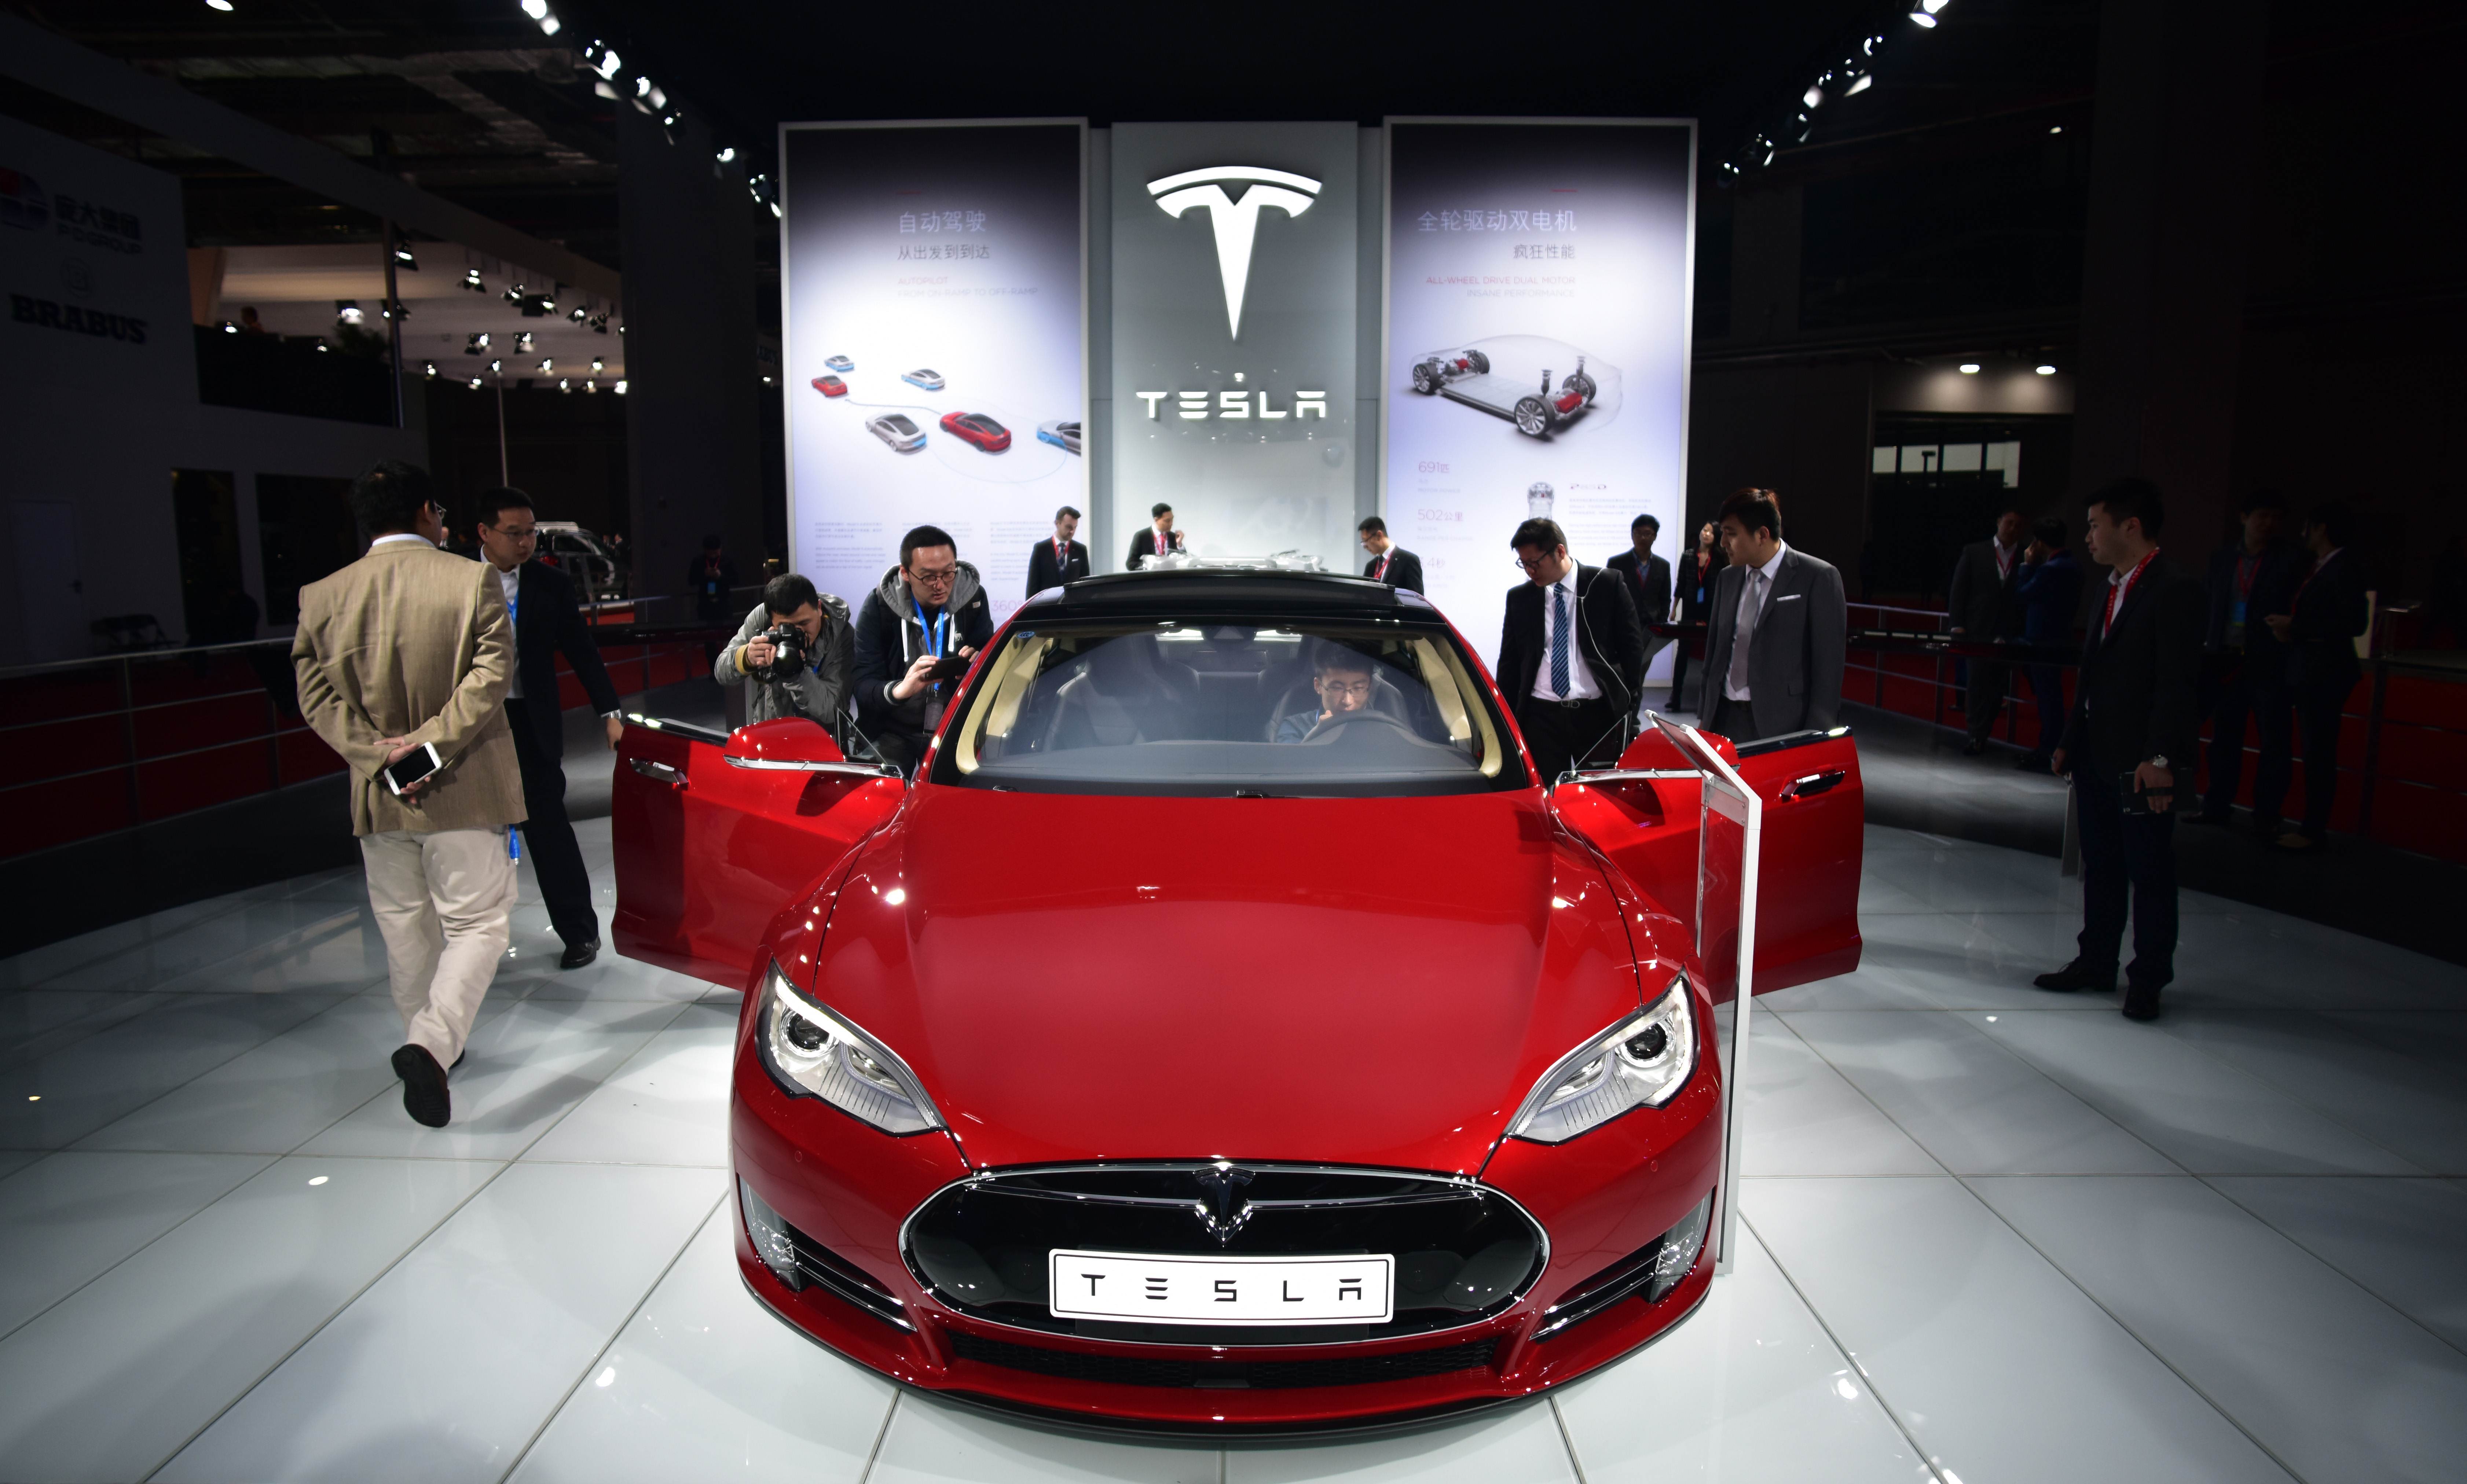 A Tesla Model S P85d car on display at the 16th Shanghai International Automobile Industry Exhibition in Shanghai on April 20, 2015. Photo: AFP